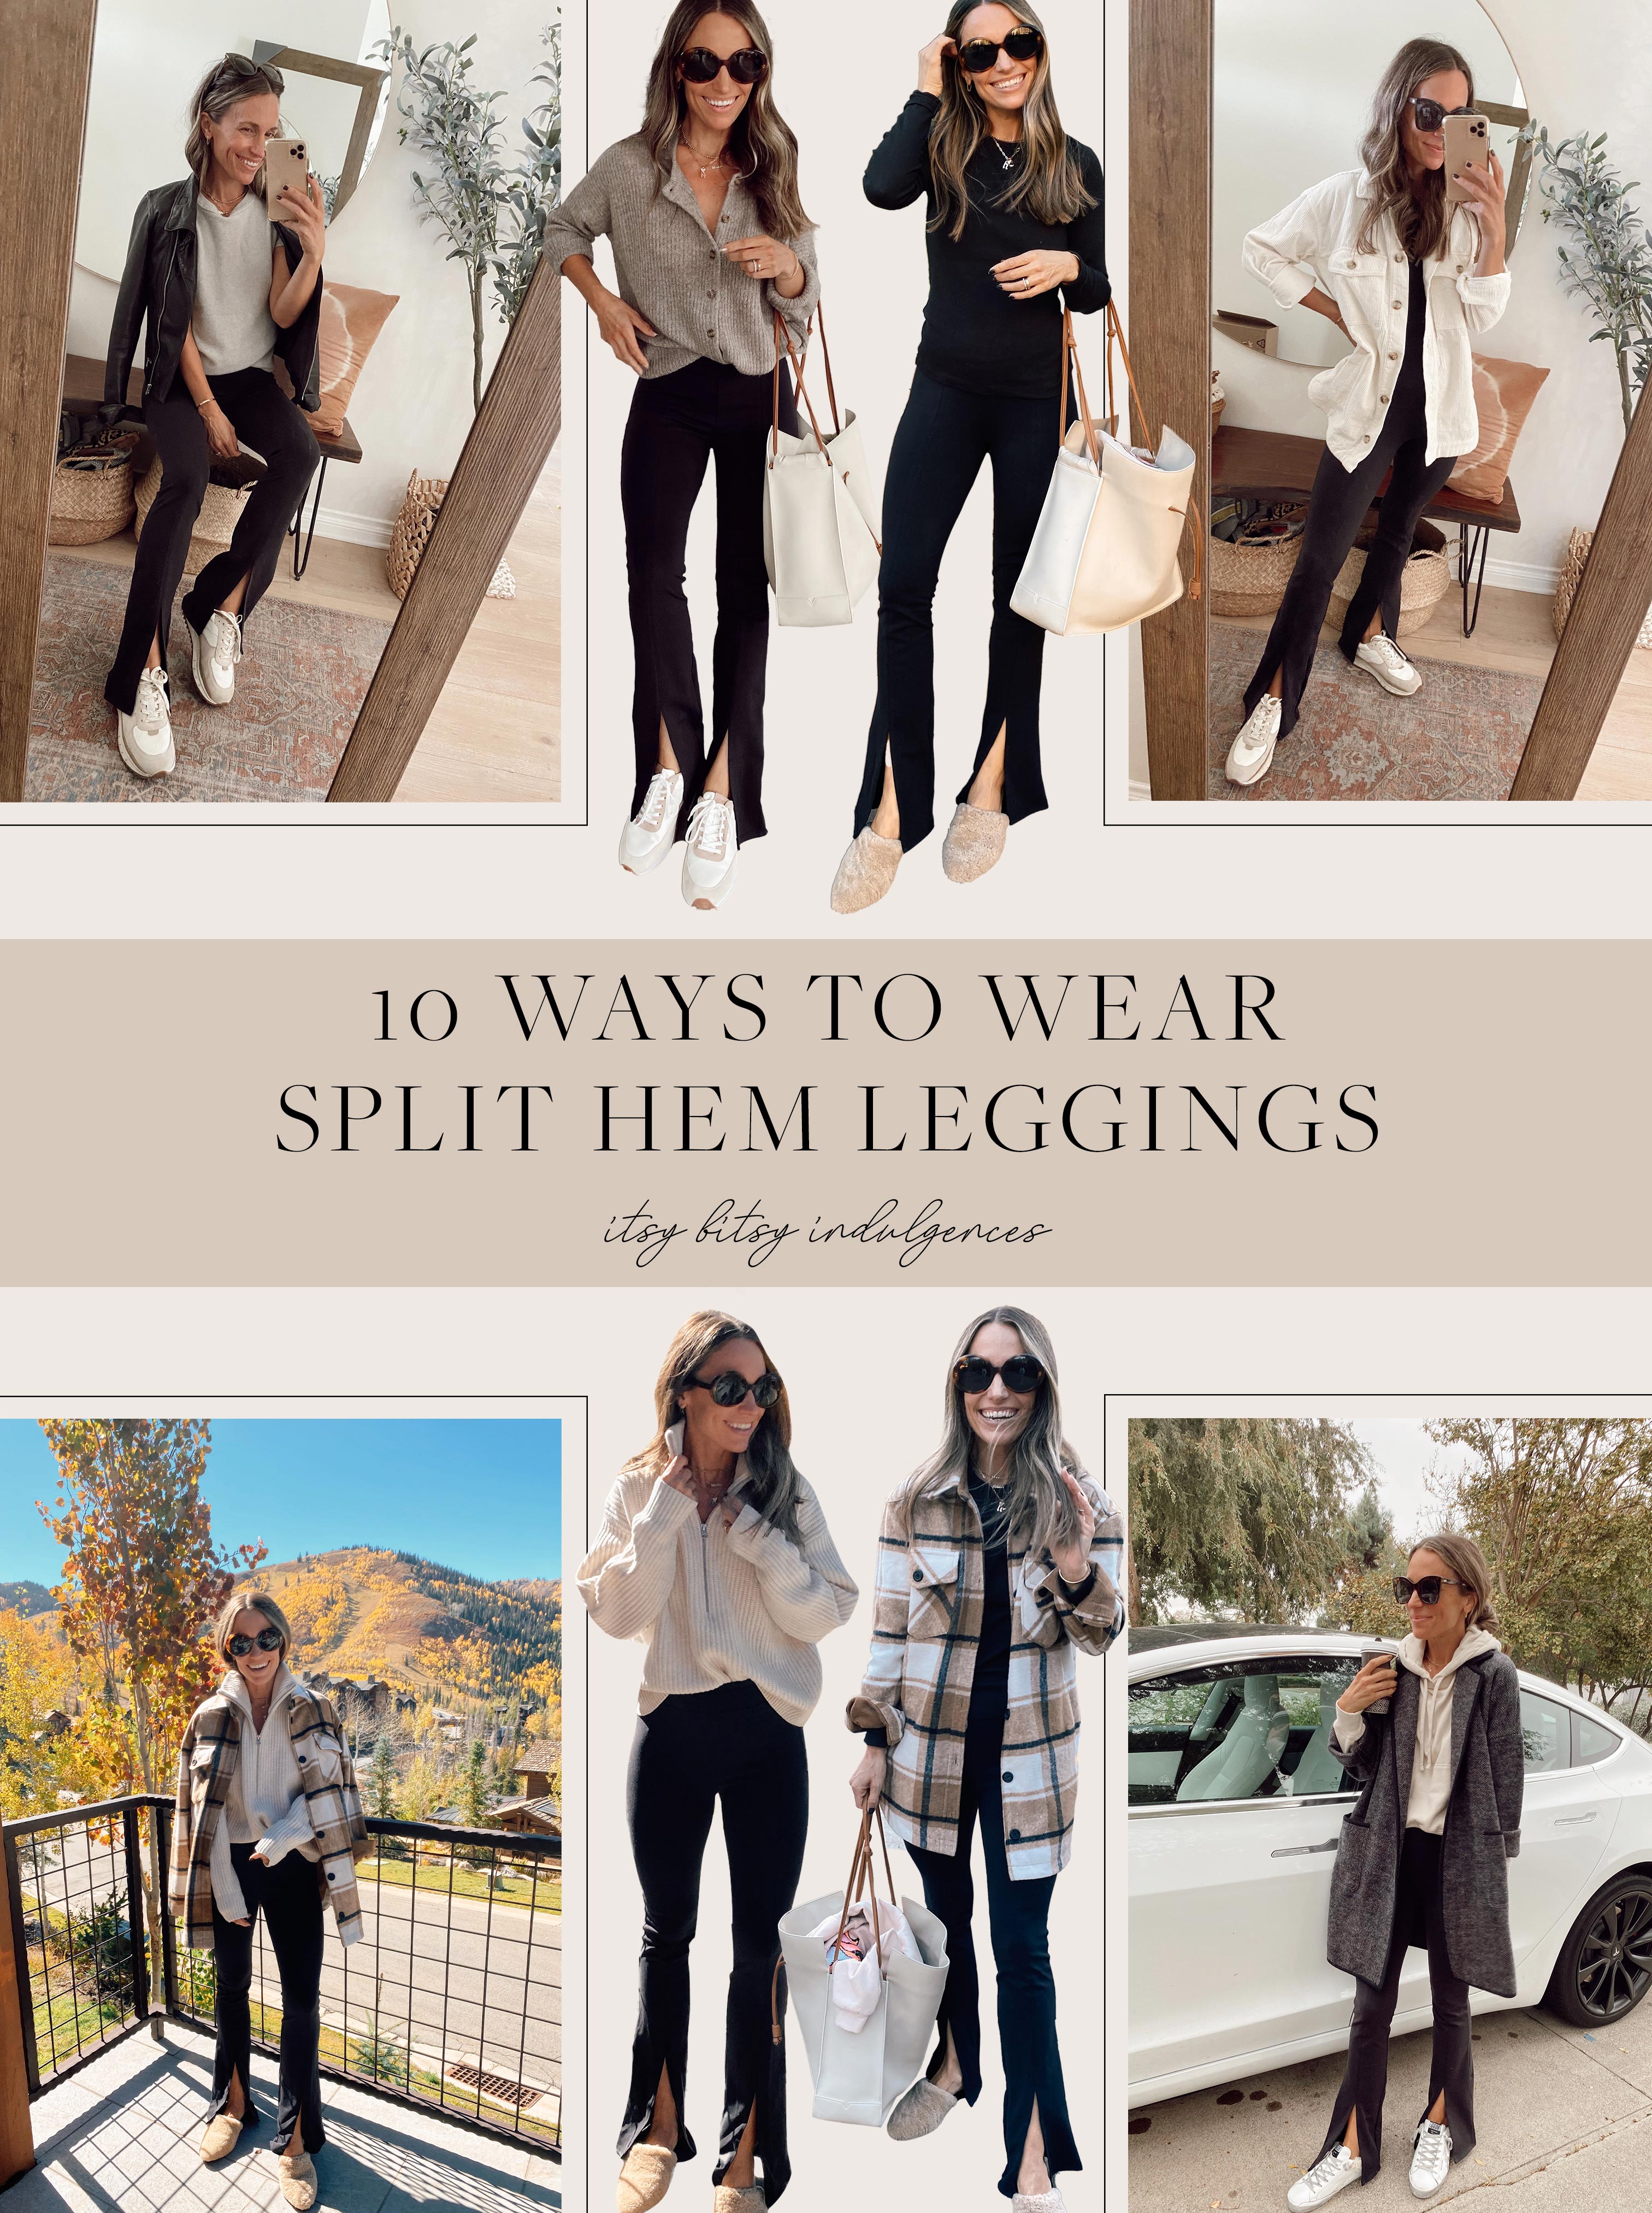 How To Wear Leggings With Outfits & Look Stylish & Chic 